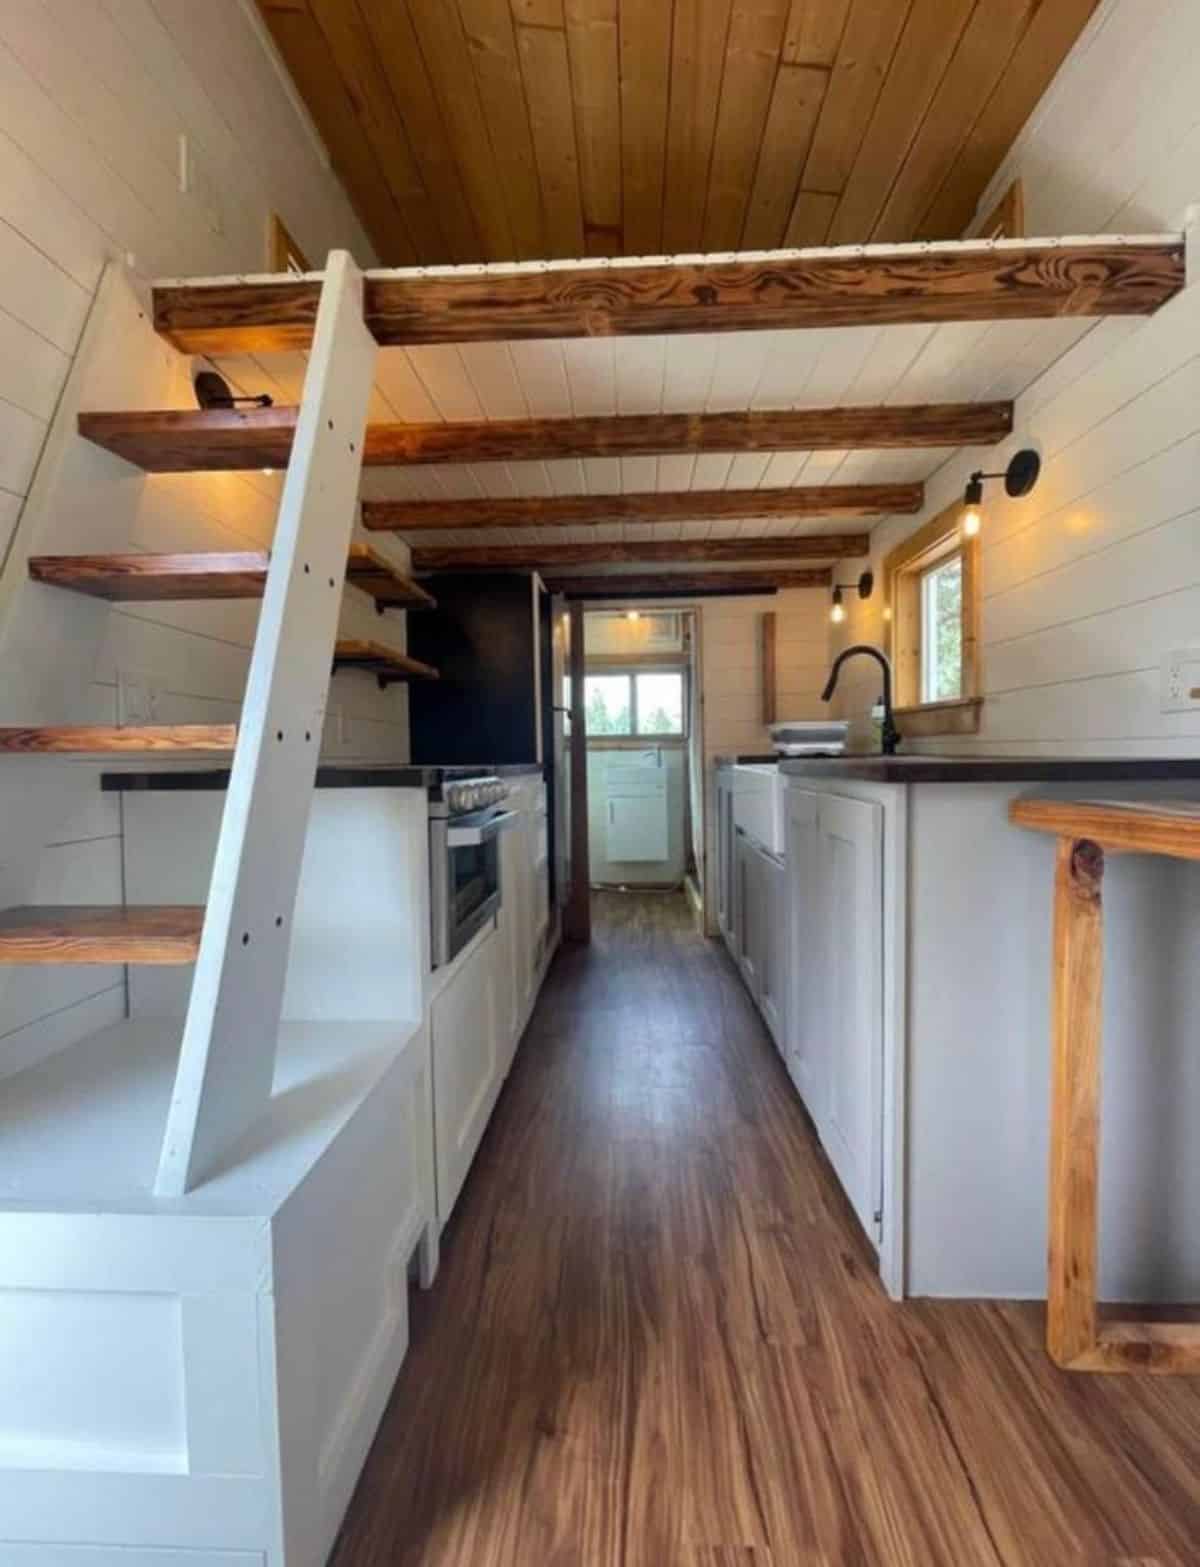 appliances and bar top table present in the kitchen area of 23’ tiny house